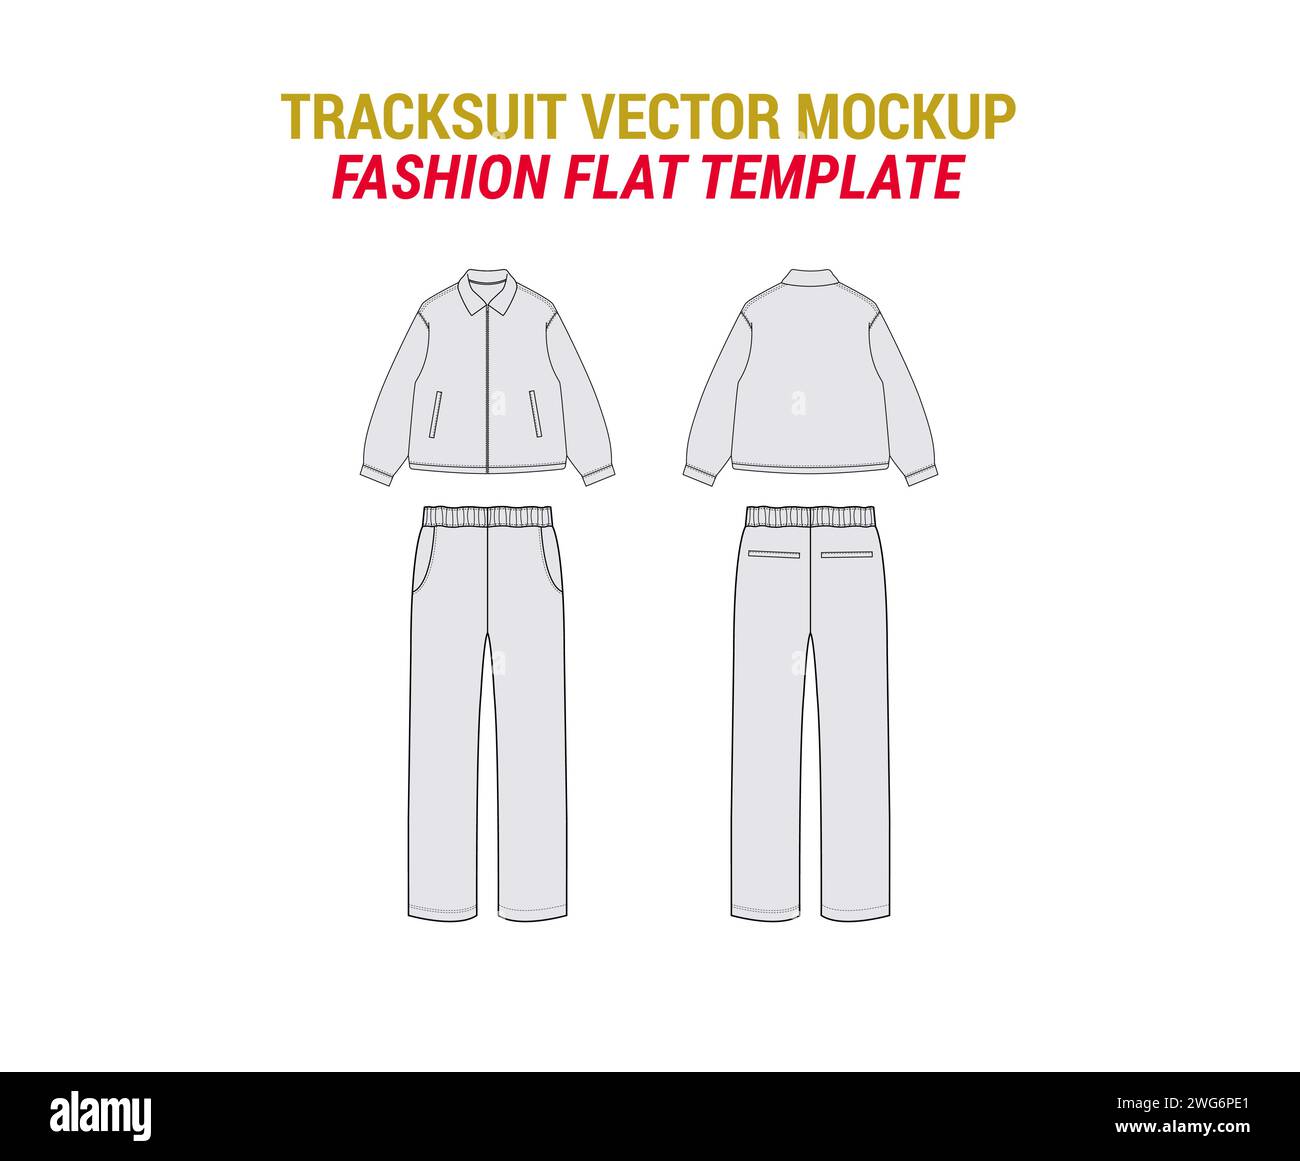 Tracksuit Fashion Flat Vector Mockup Template Tracksuit Technical Drawing Illustration Sportswear Fashion Clothes Trouser and Sweatpants Stock Vector